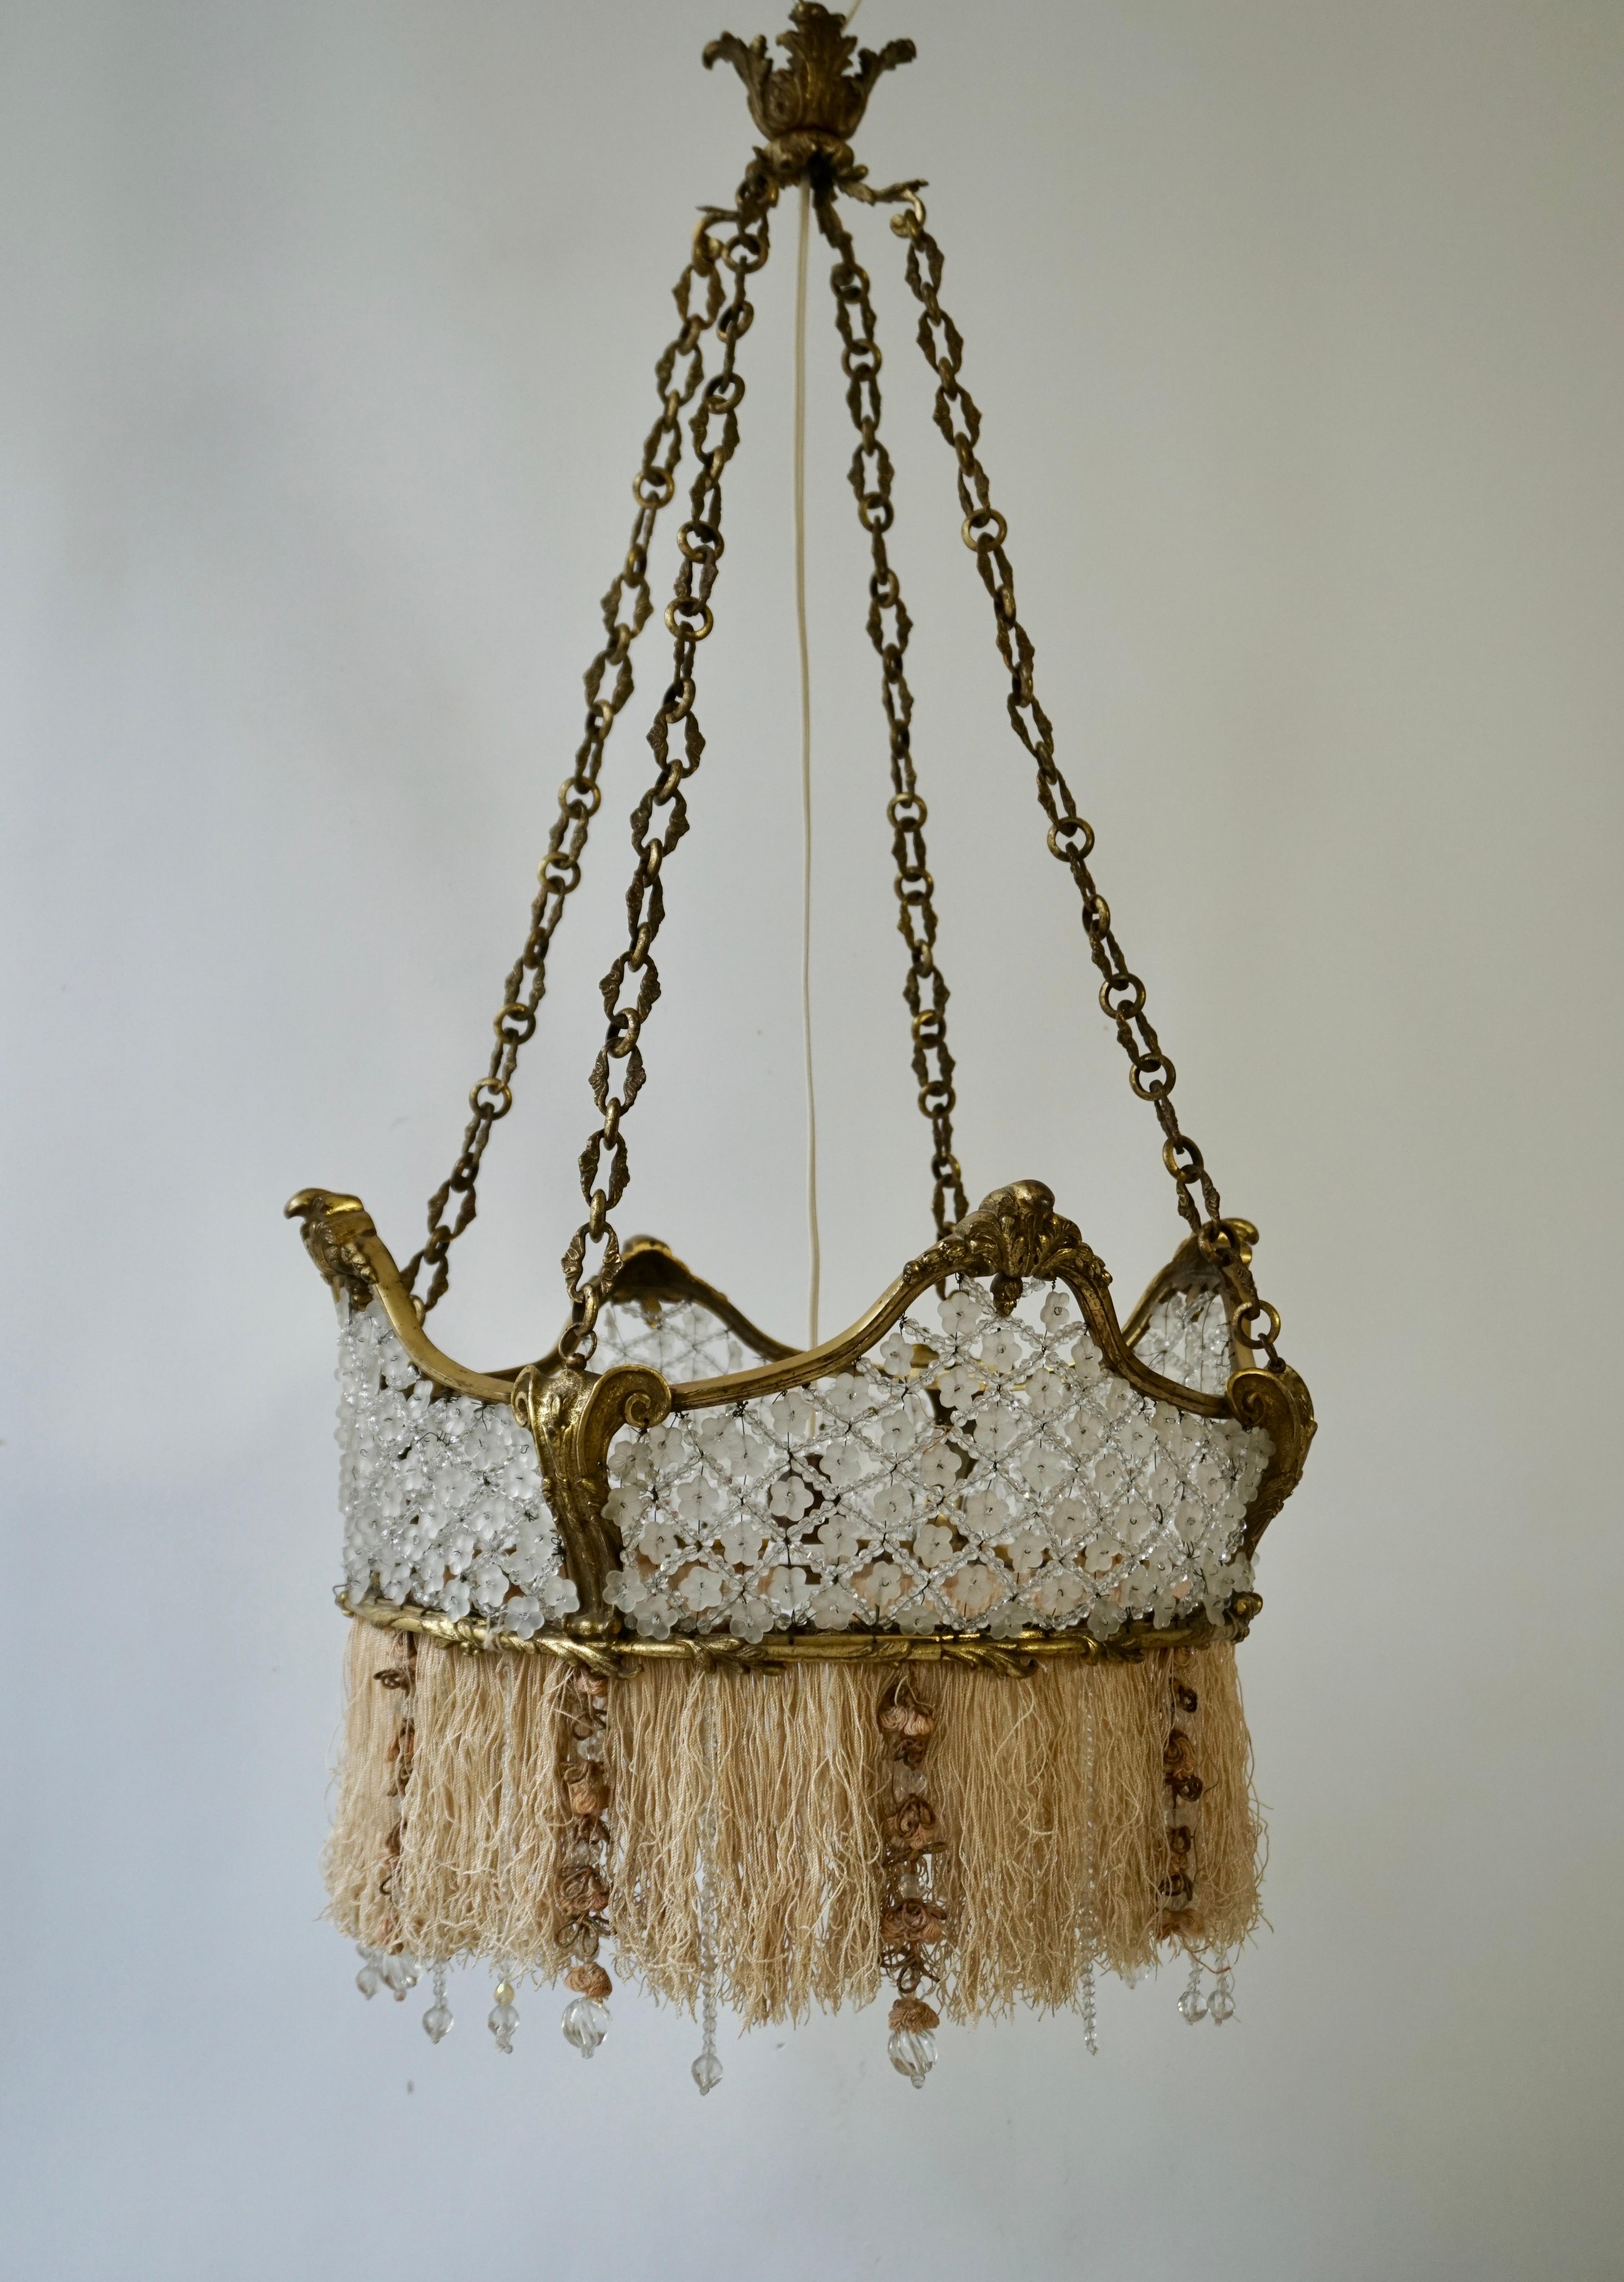 20th Century French Midcentury Bronze and Glass Flower Crown Chandelier with Gold Accents